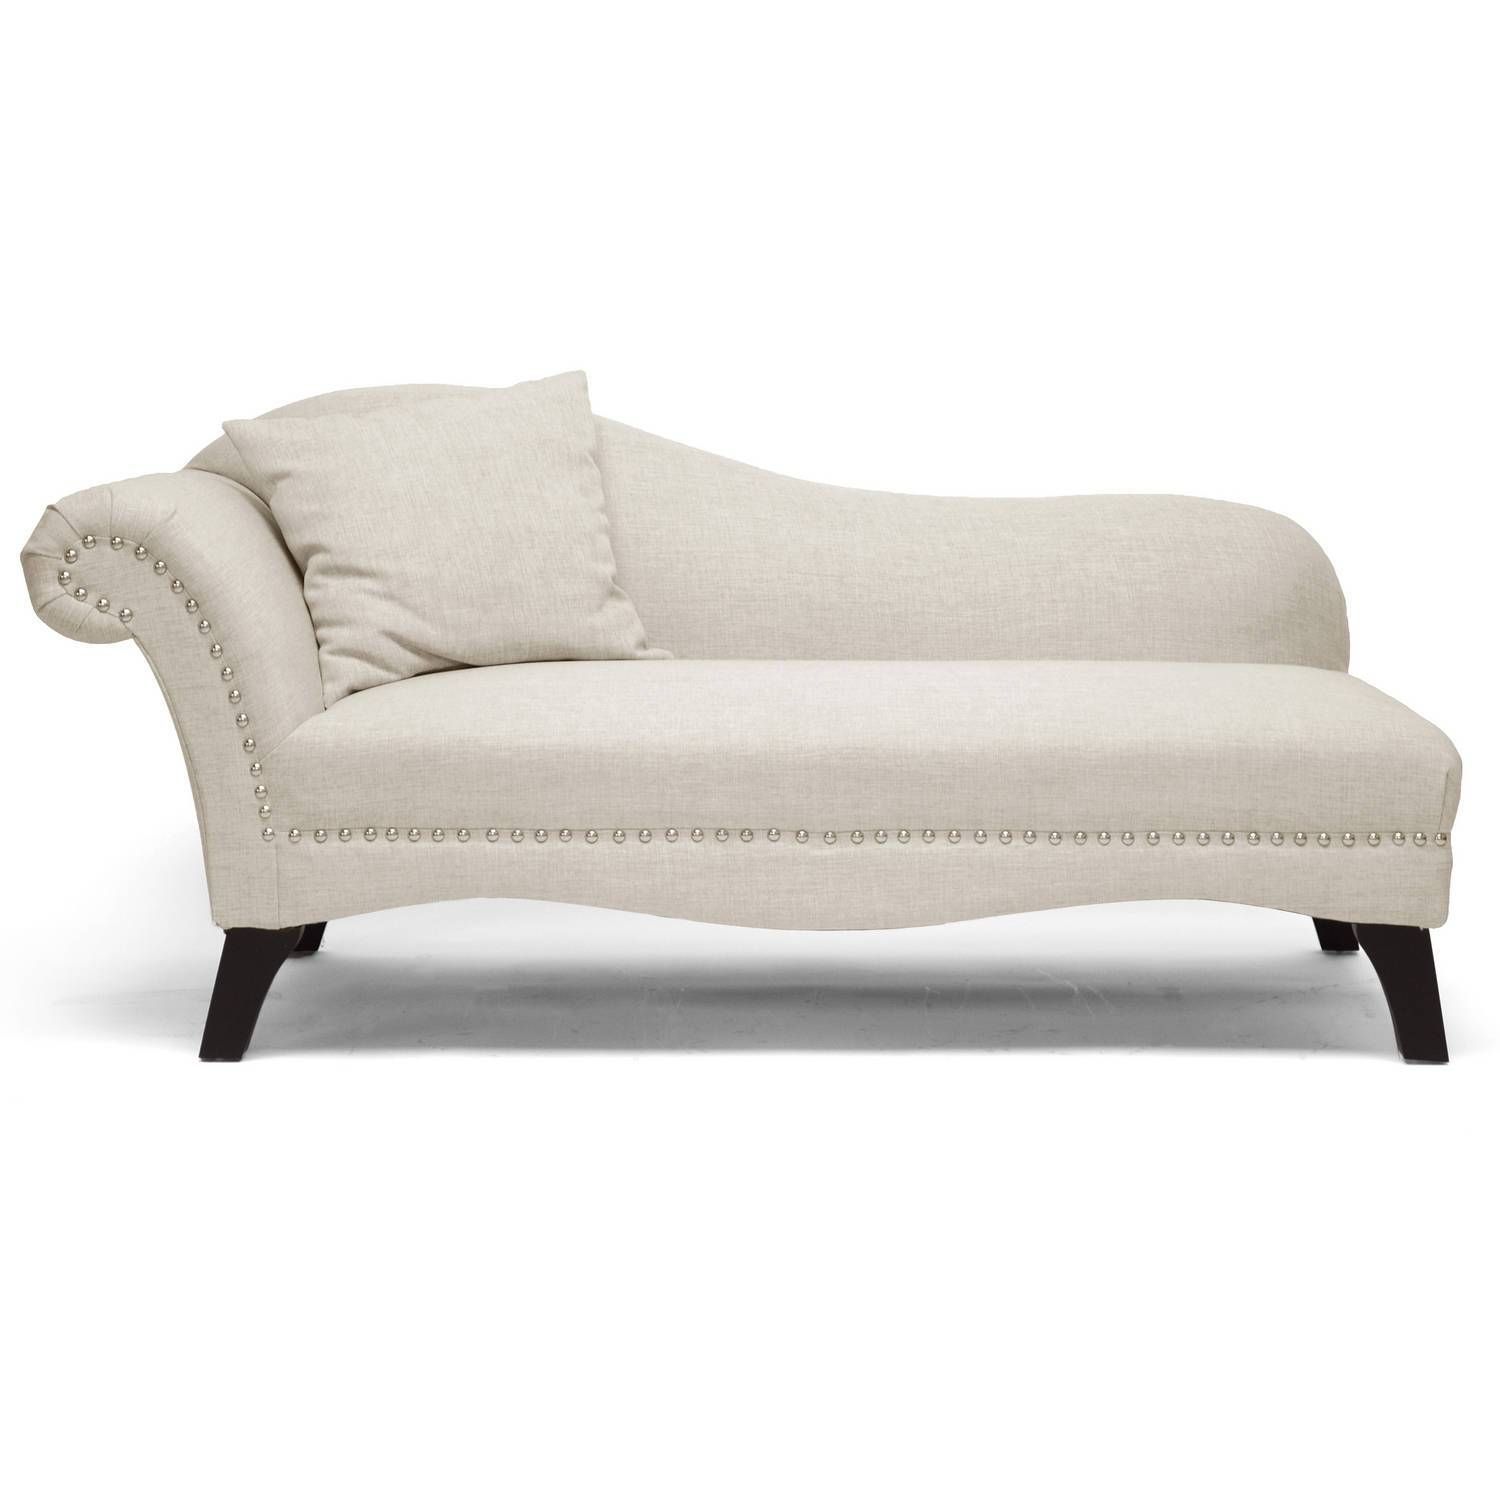 Chaise Lounges – Walmart Inside Sofas And Chaises Lounge Sets (View 13 of 15)